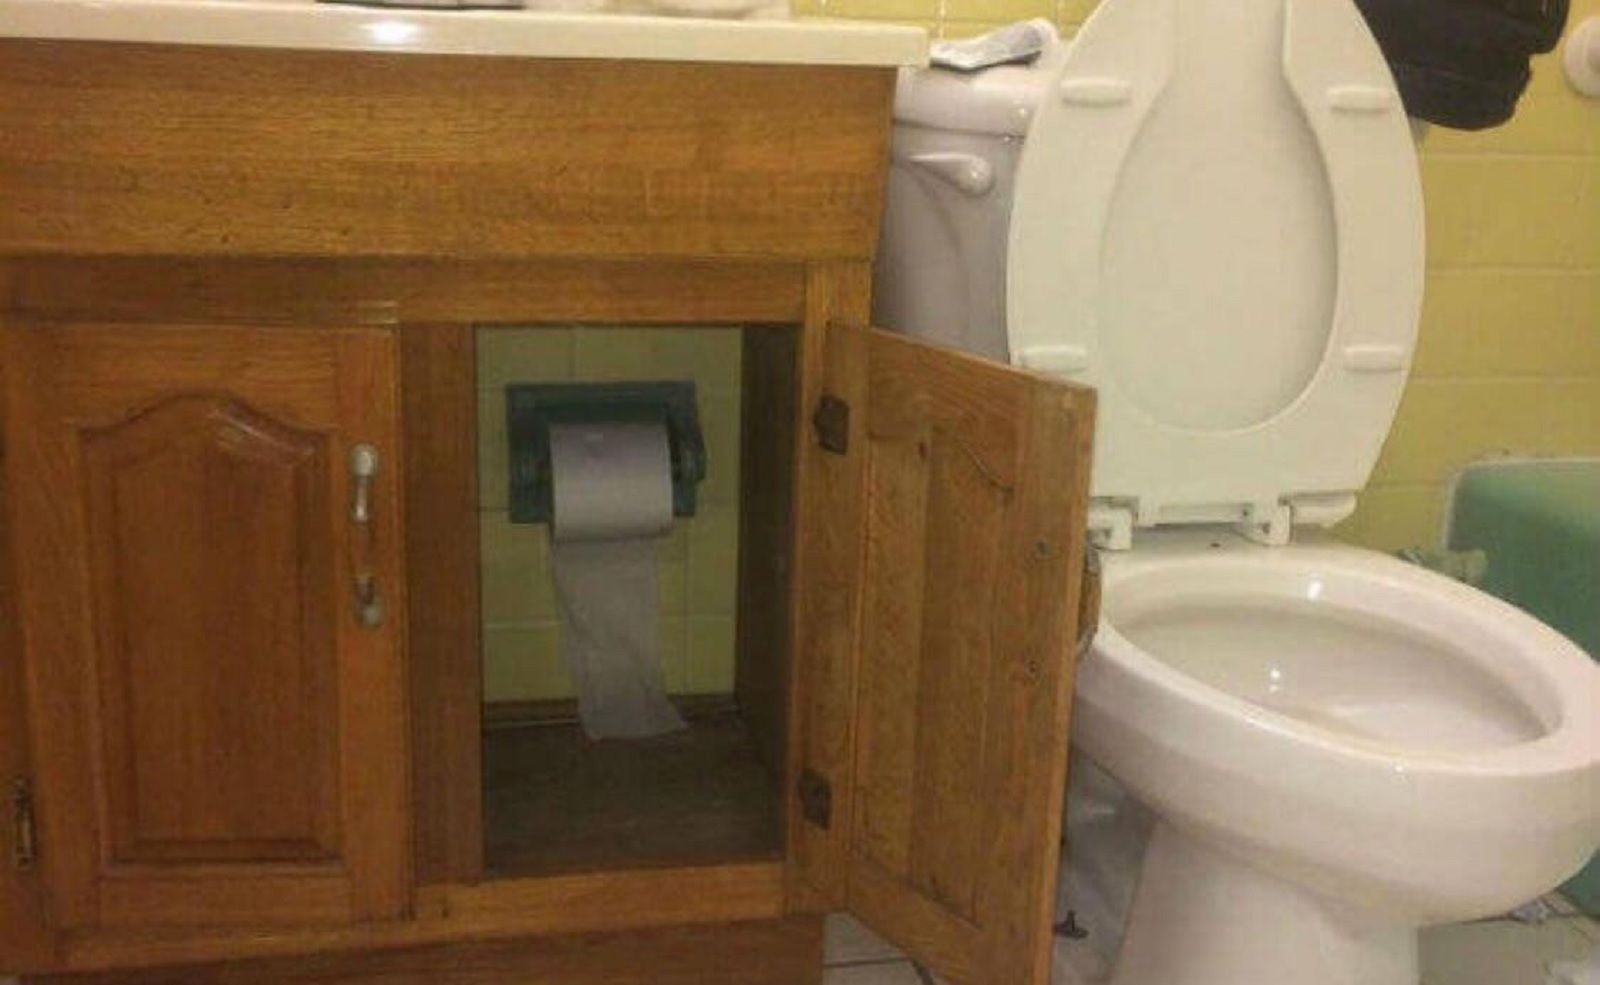 Amusing And Frustrating Design Fails From Around The World image 27